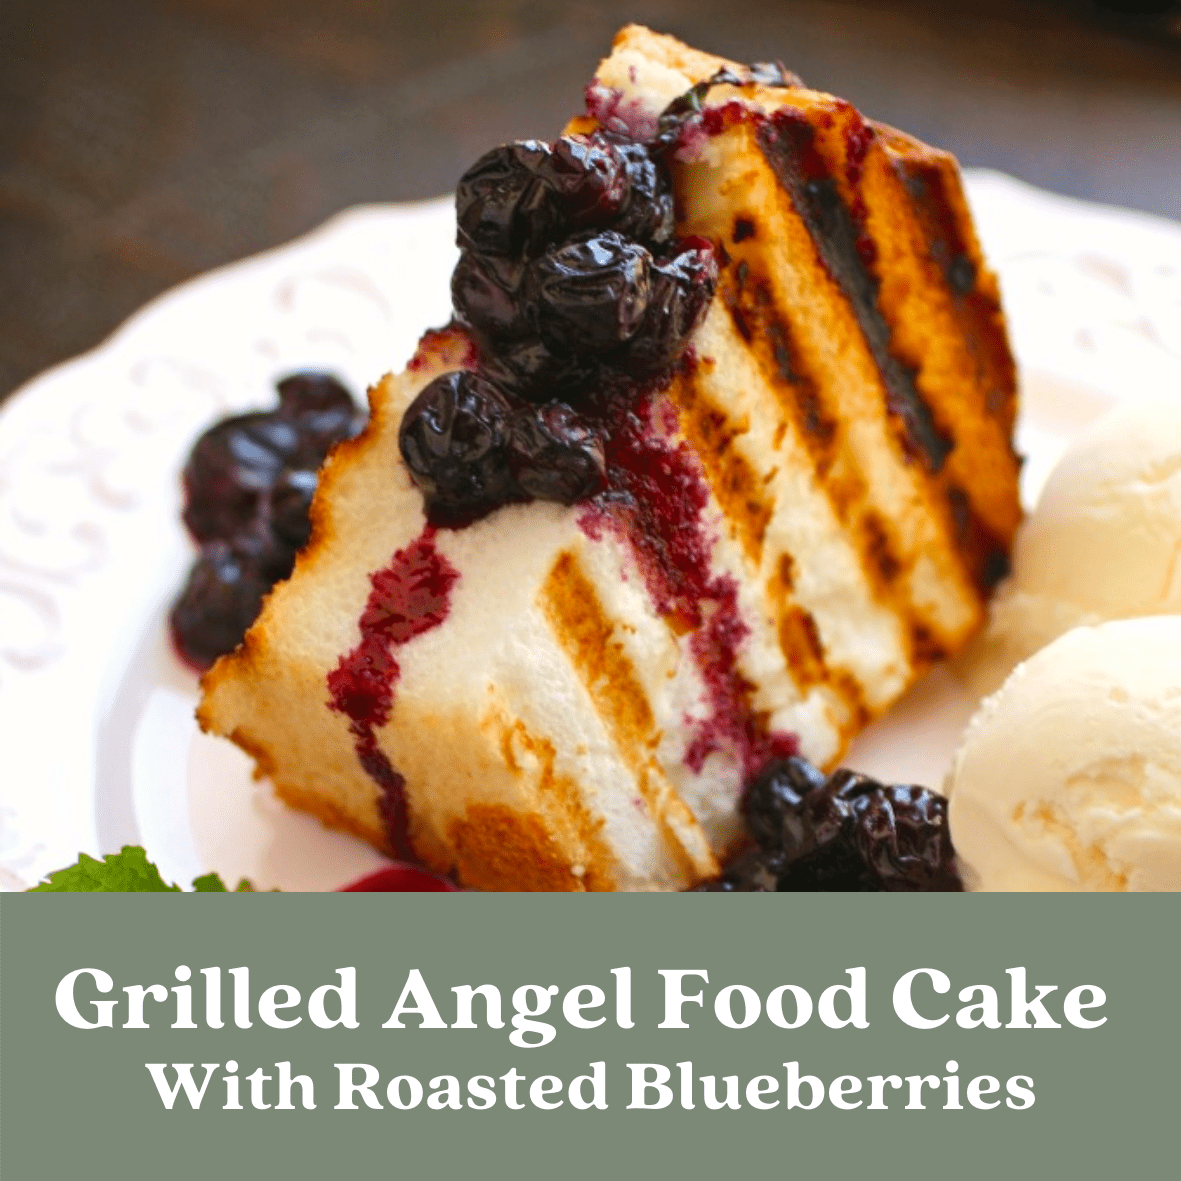 Grilled Angel Food Cake With Roasted Blueberries